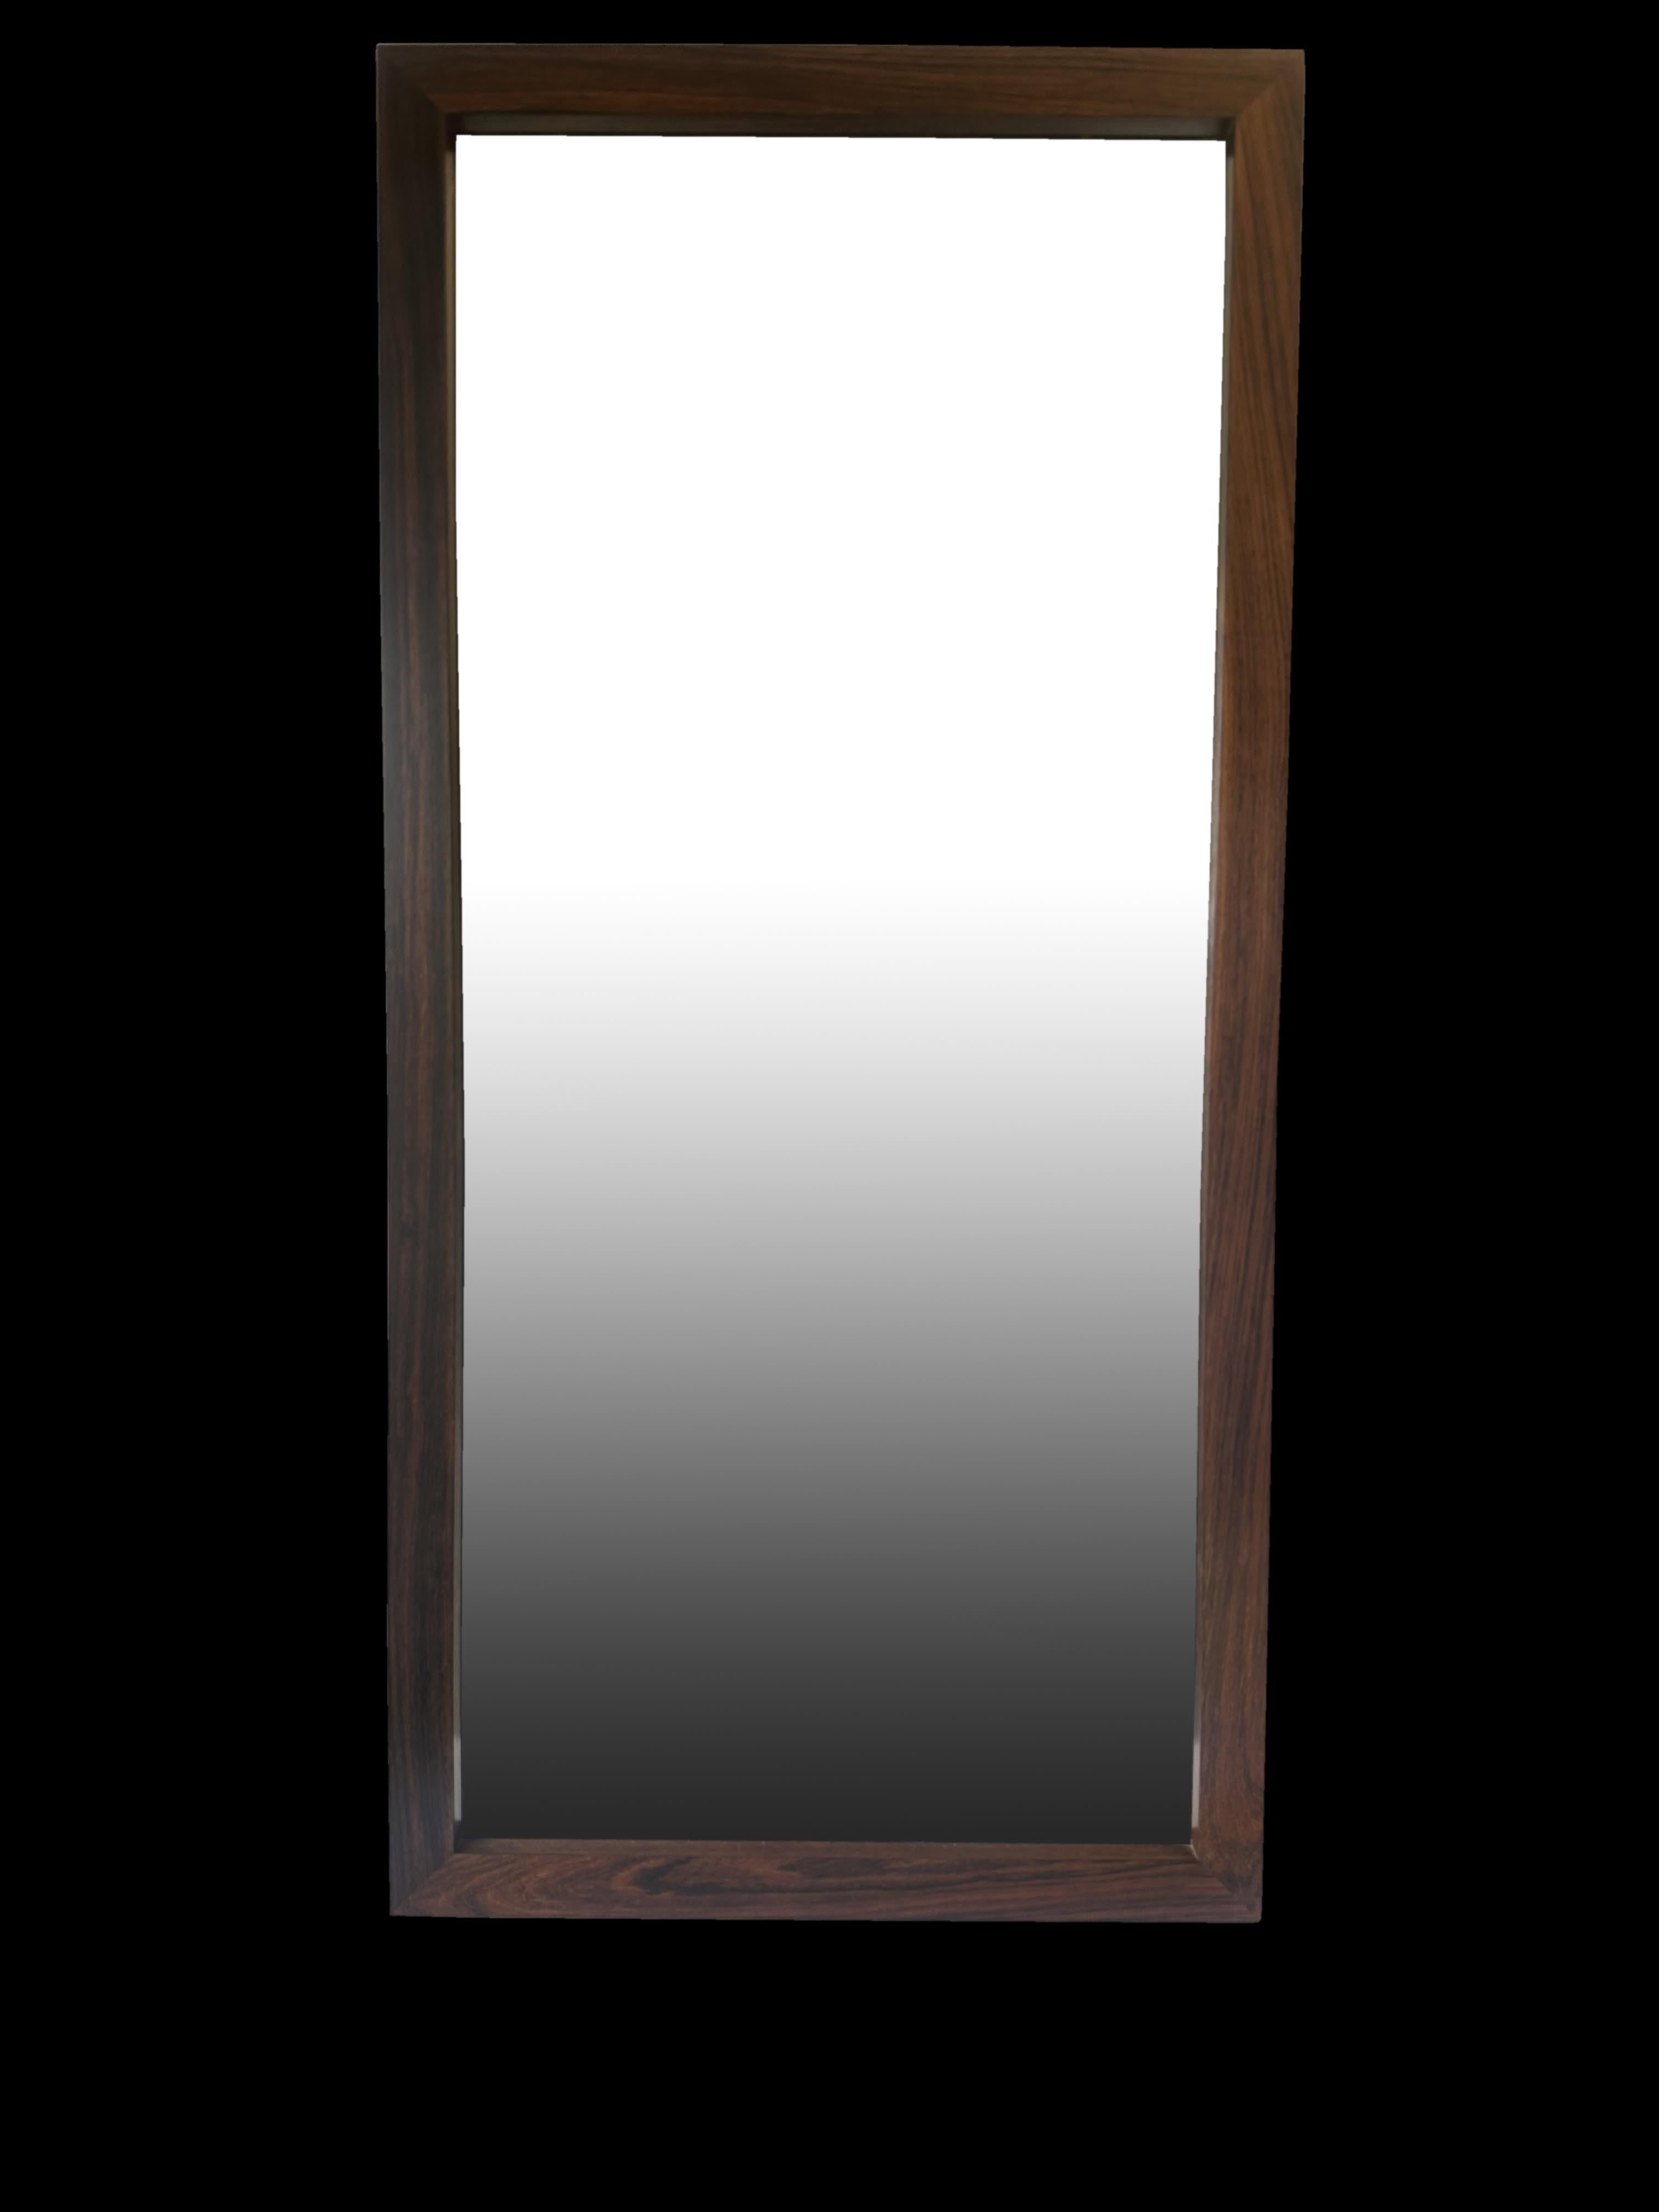 A very nice wall mirror in originnal condition which is very good and the mirror glass is perfect.
It has a label 'AM' which is possibly the retailers label.